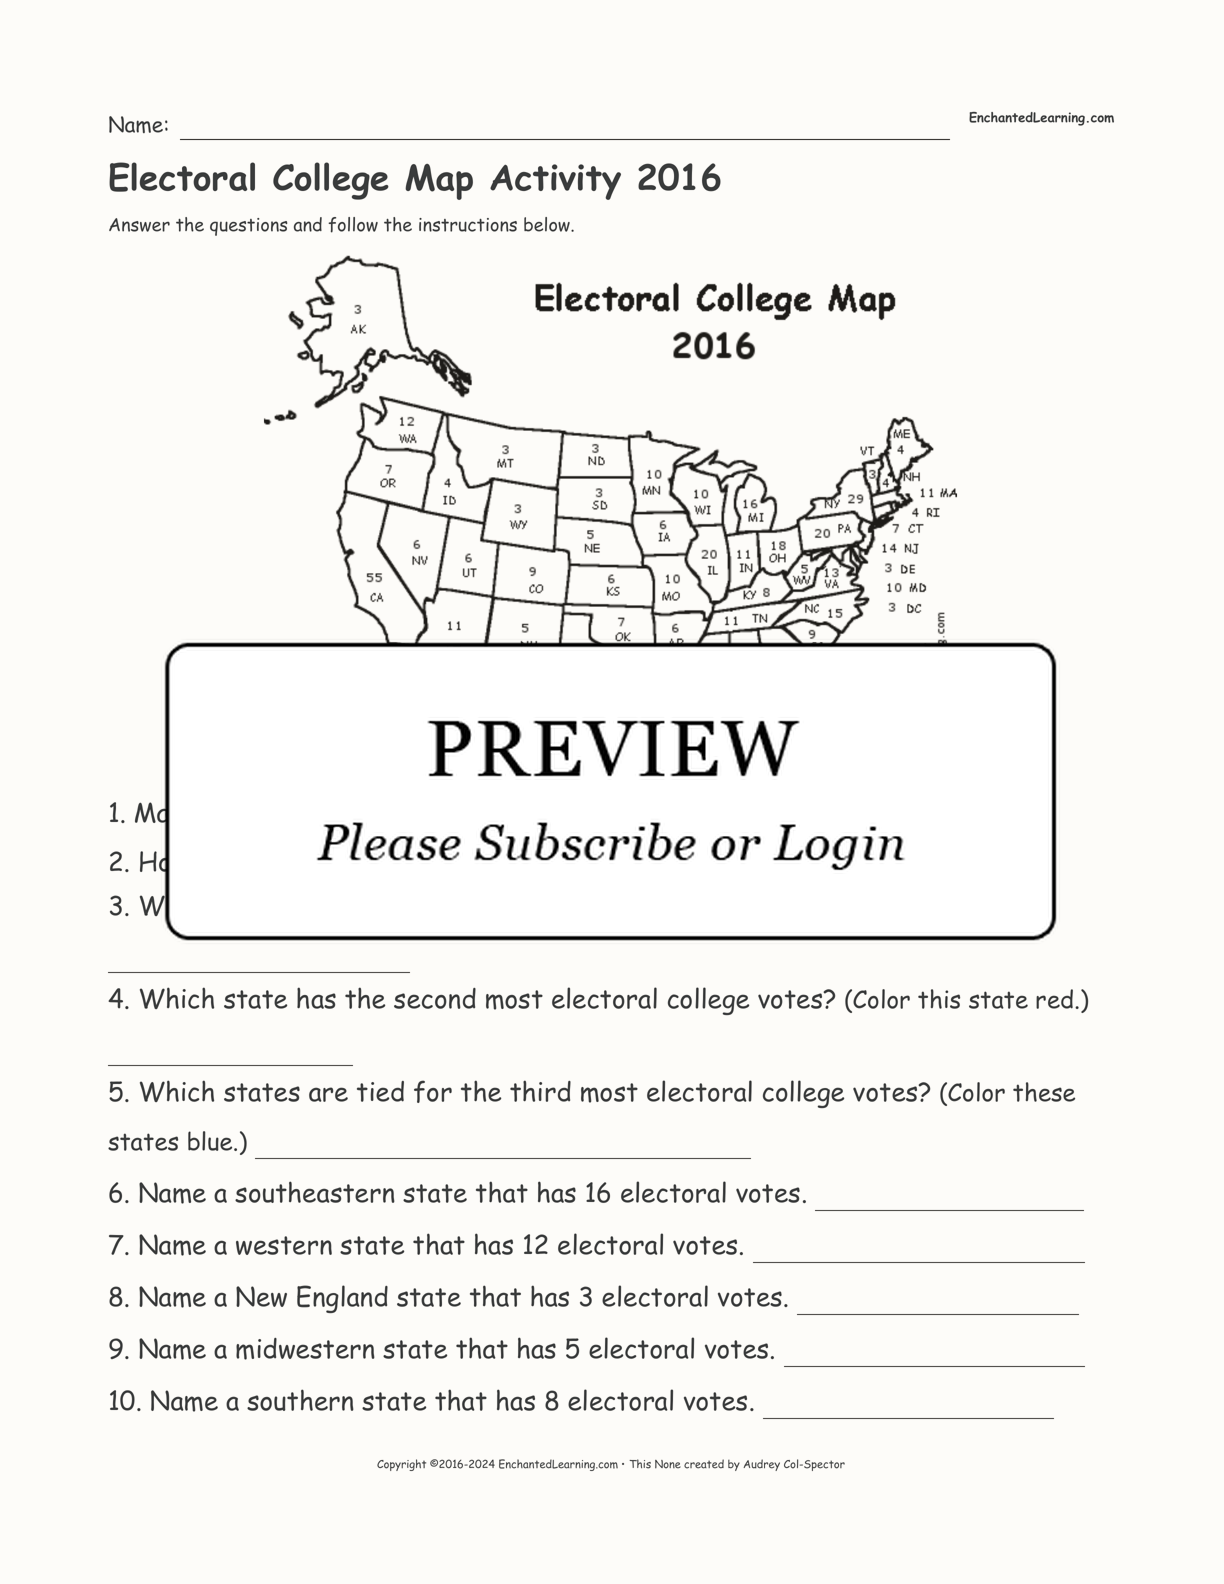 Electoral College Map Activity 2016 interactive worksheet page 1